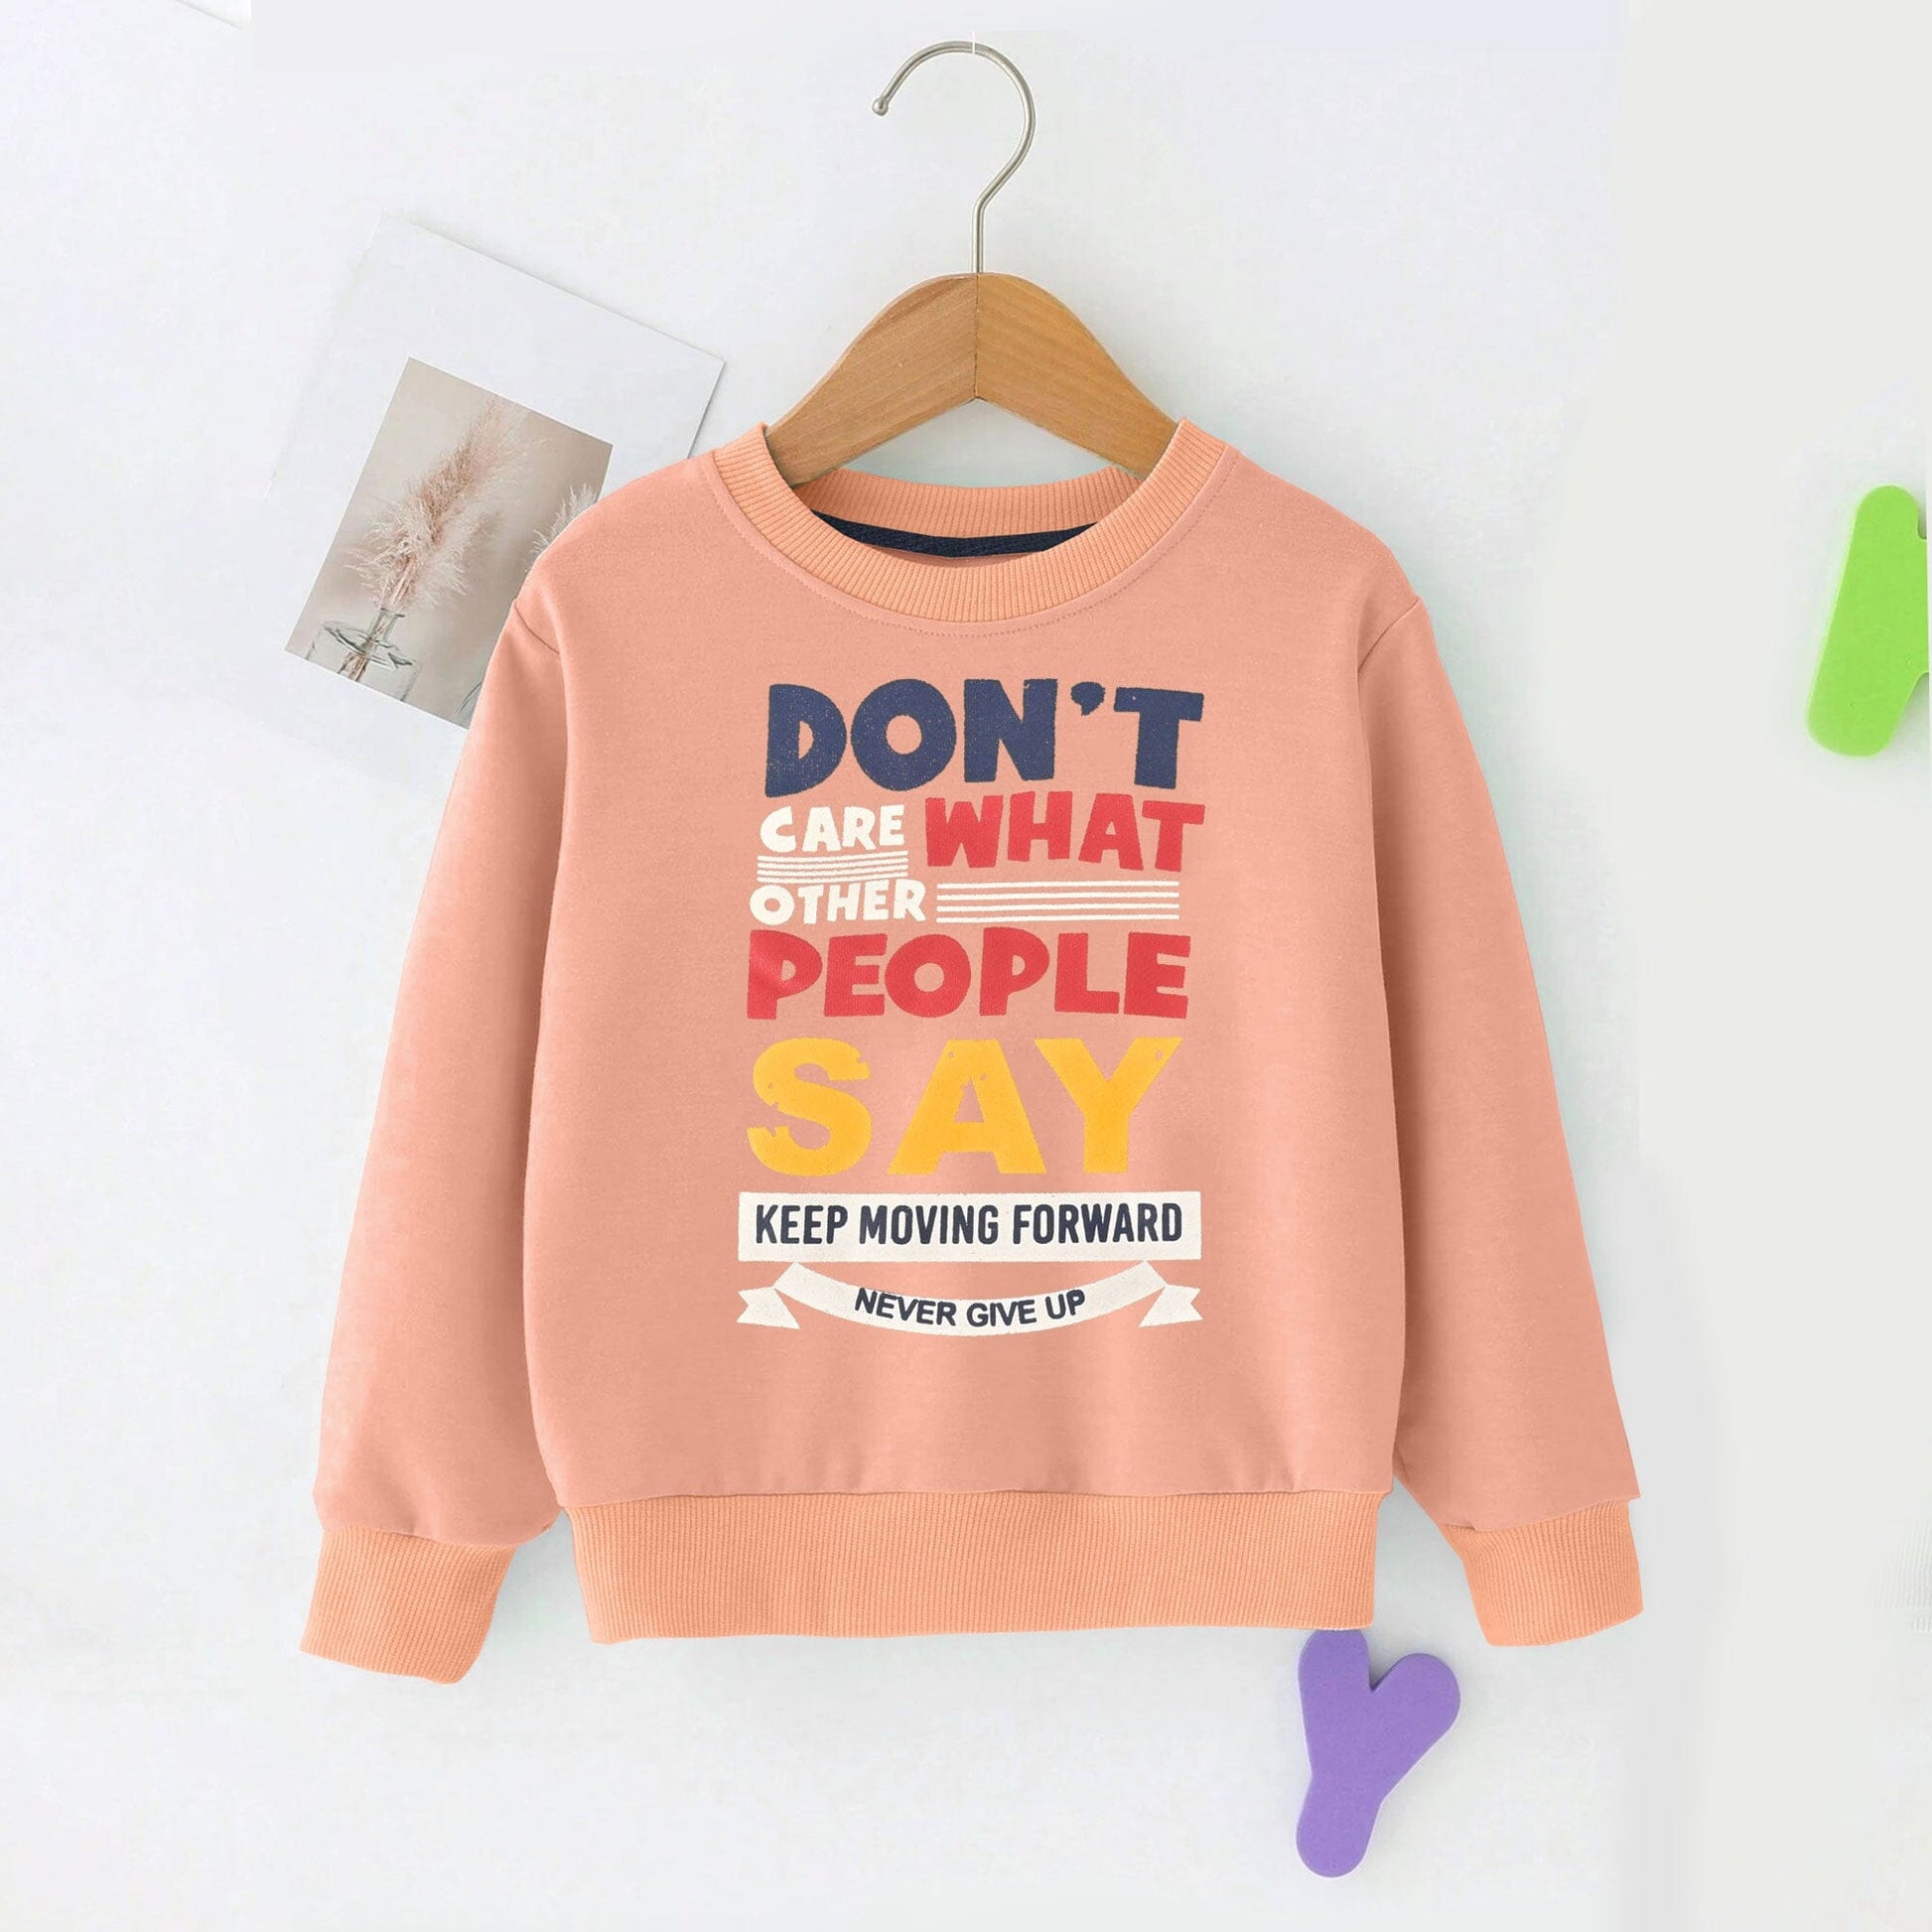 Kid's Don't Care What People Say Printed Fleece Sweat Shirt Kid's Sweat Shirt SNR Powder Pink 9-12 Months 